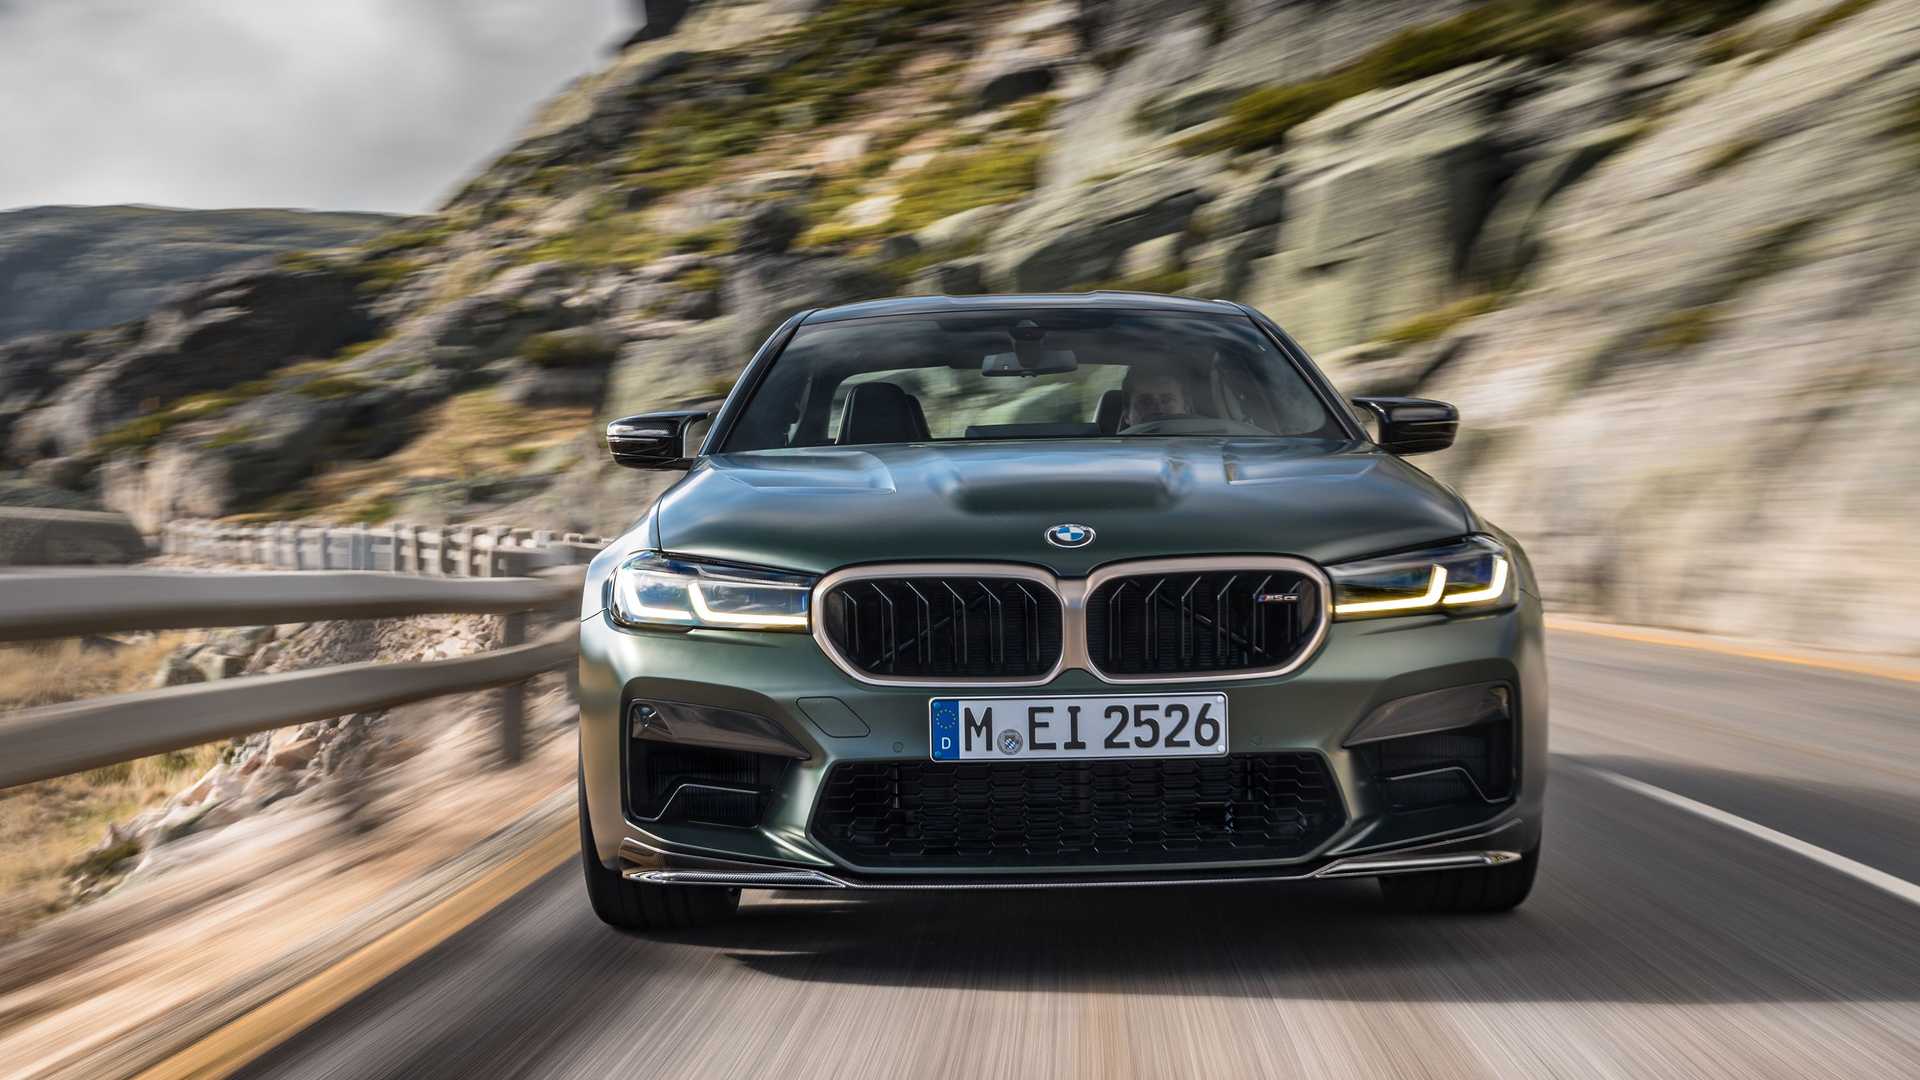 2022 BMW M5 CS Launched: Detailed Image Gallery, Cabin, Features and More